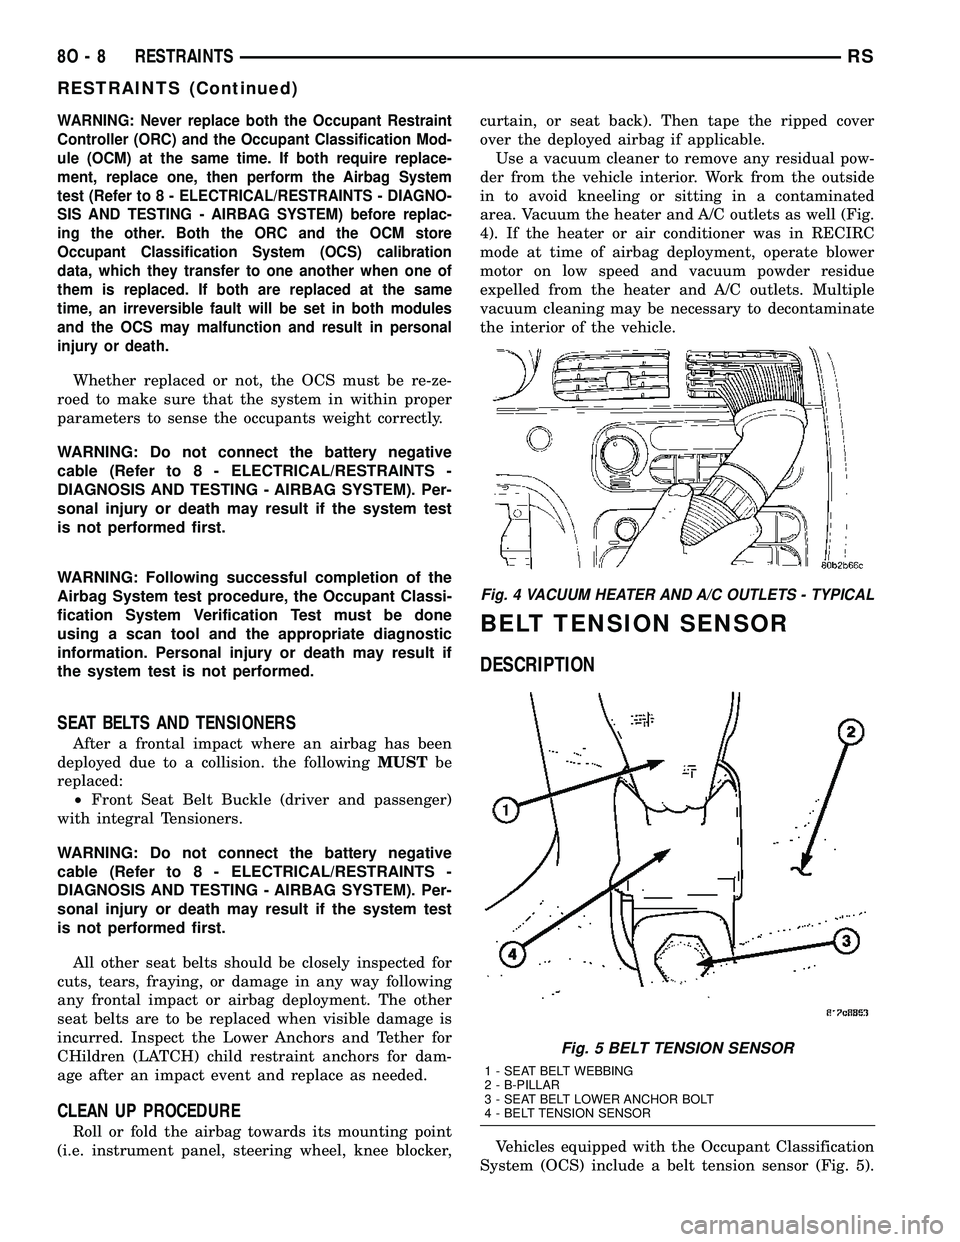 CHRYSLER VOYAGER 2005  Service Manual WARNING: Never replace both the Occupant Restraint
Controller (ORC) and the Occupant Classification Mod-
ule (OCM) at the same time. If both require replace-
ment, replace one, then perform the Airbag